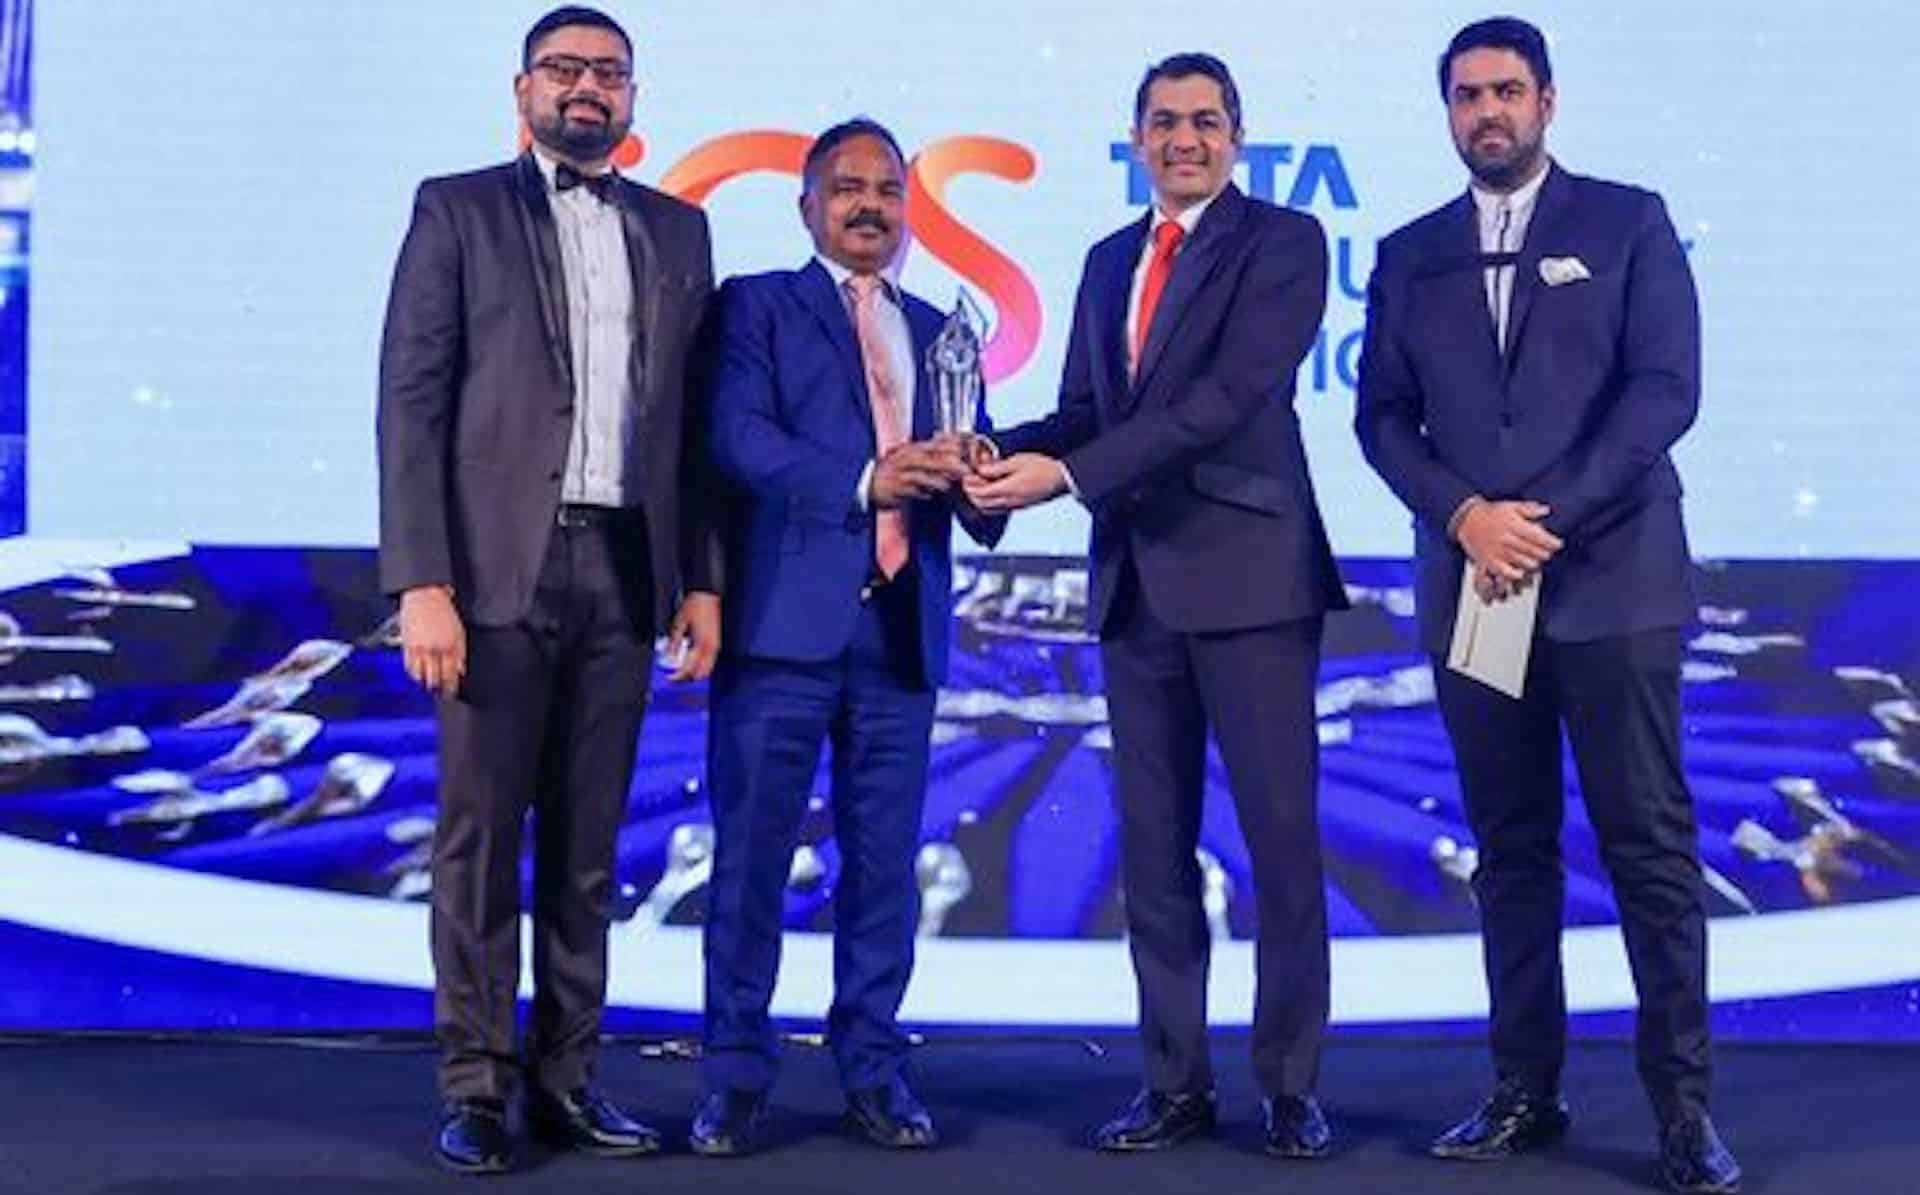 Inspiring leaders, organizations win big at the first-ever UAE-India Awards